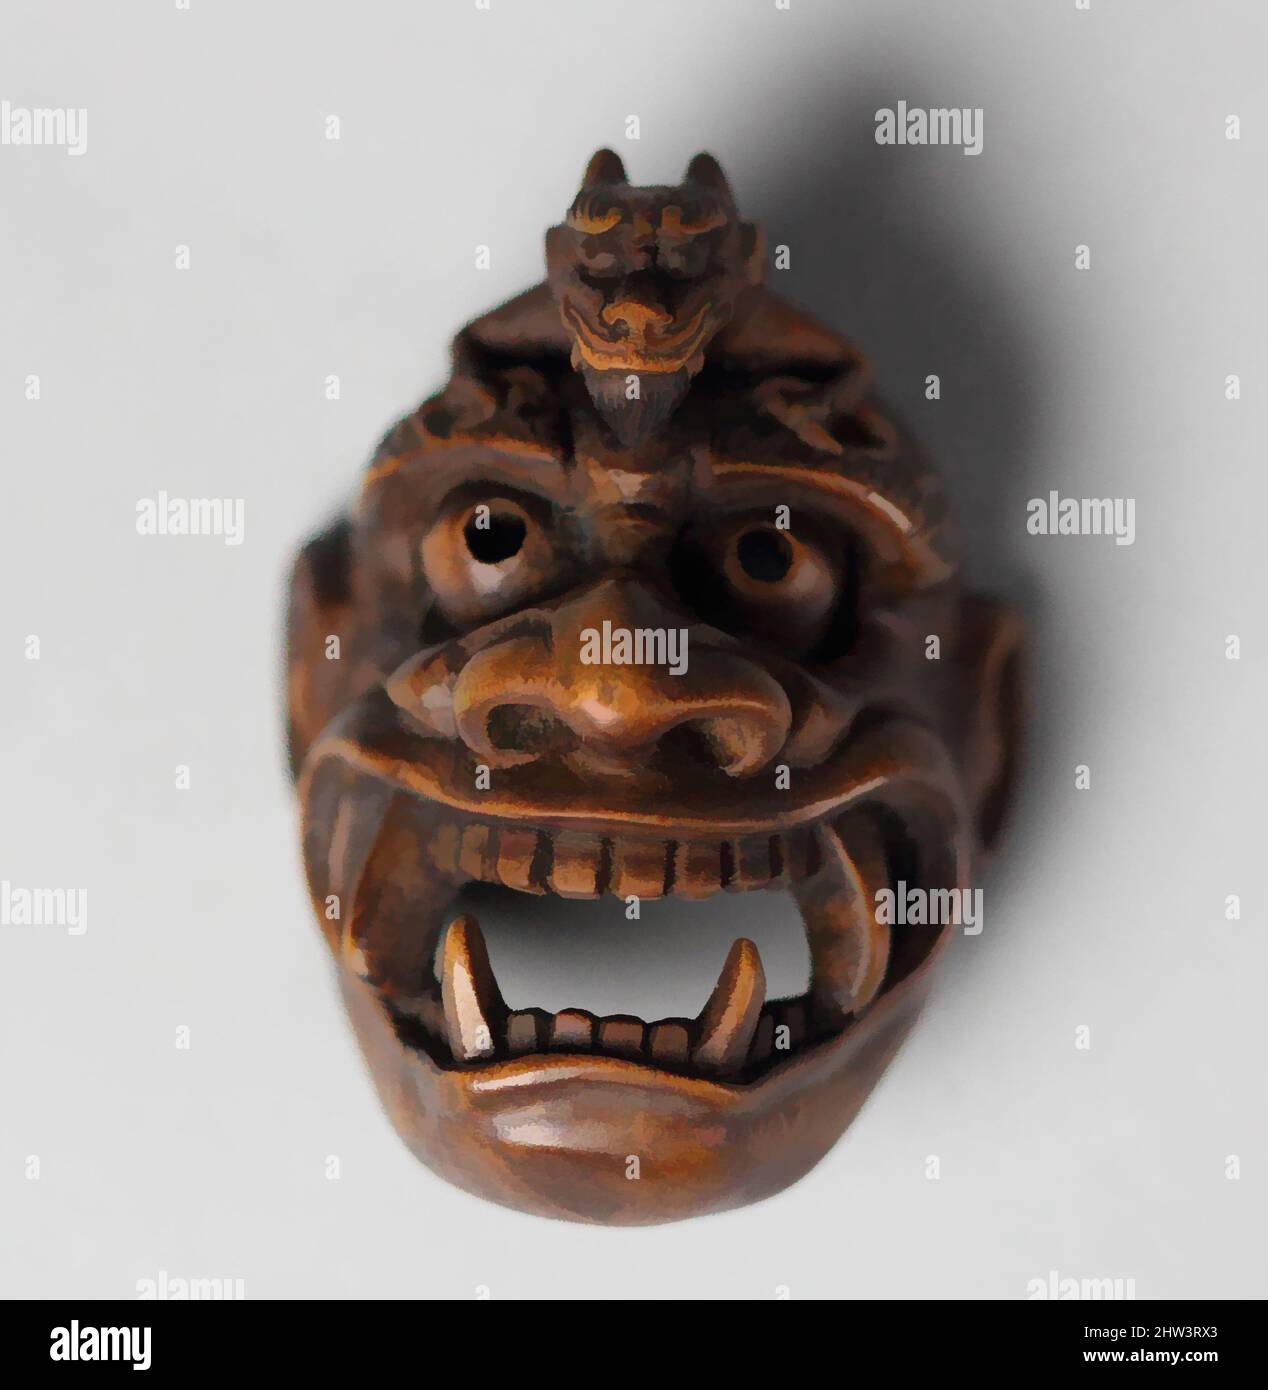 Art inspired by Netsuke of Demon Mask Derived from Bugaku, 19th century, Japan, Wood, H. 2 in. (5.1 cm); W. 1 3/8 in. (3.5 cm); D. 1 in. (2.5 cm), Netsuke, Classic works modernized by Artotop with a splash of modernity. Shapes, color and value, eye-catching visual impact on art. Emotions through freedom of artworks in a contemporary way. A timeless message pursuing a wildly creative new direction. Artists turning to the digital medium and creating the Artotop NFT Stock Photo